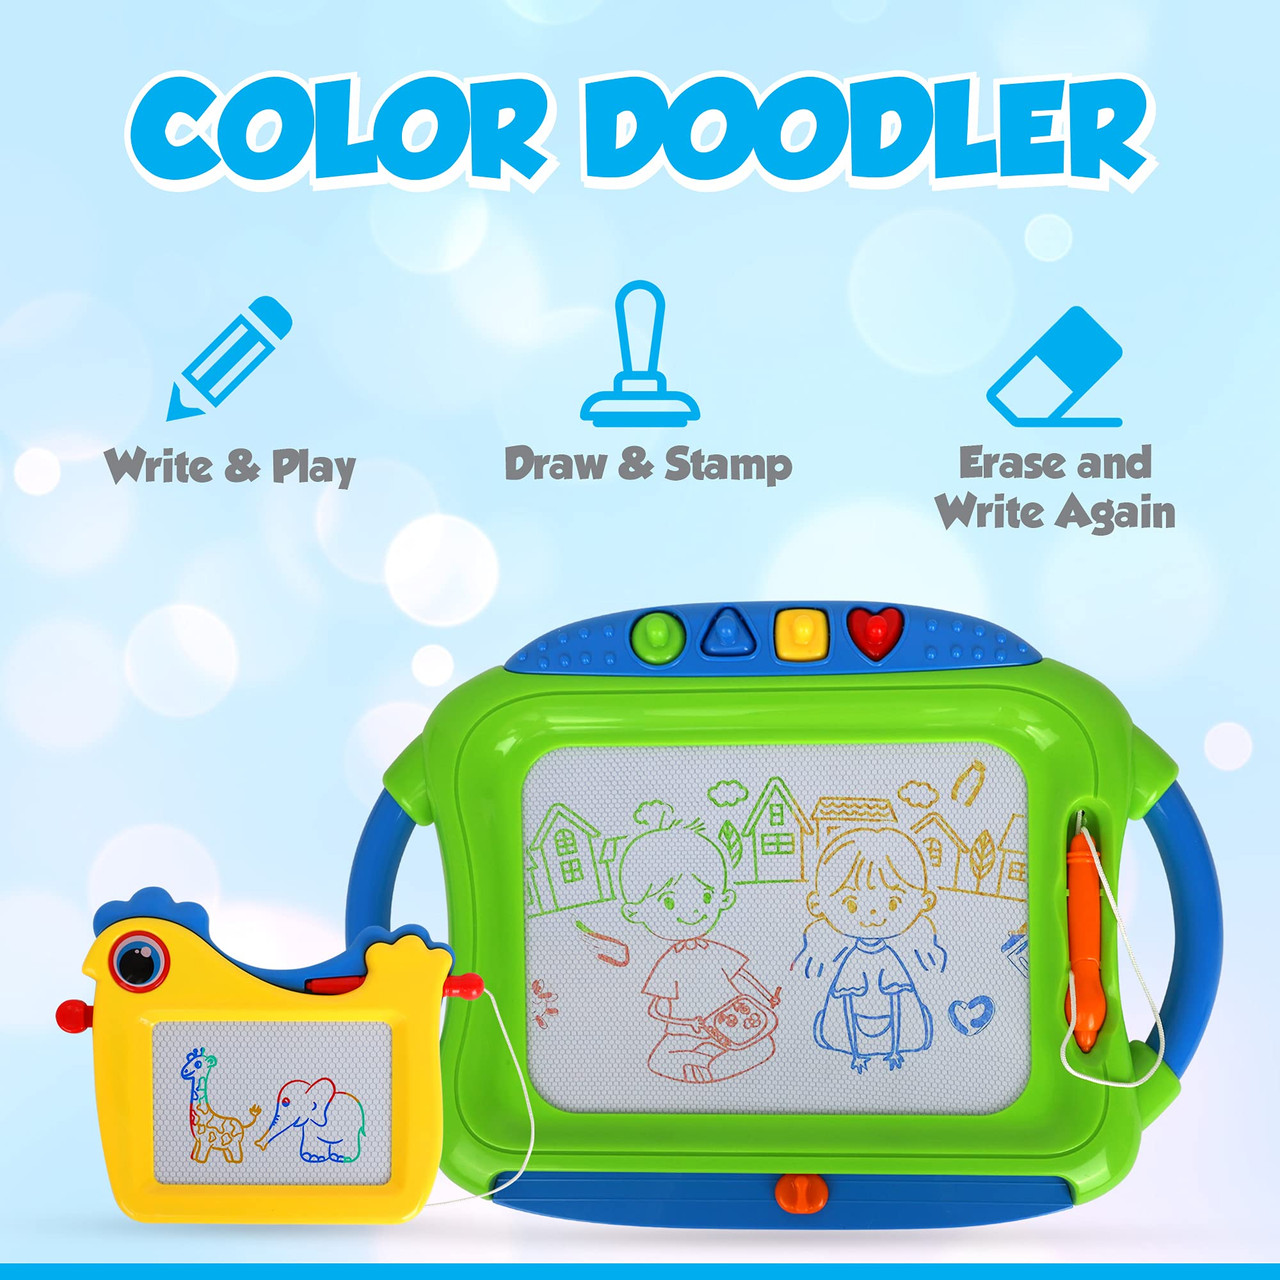 Writing Board For Kids Magnetic Drawing Board